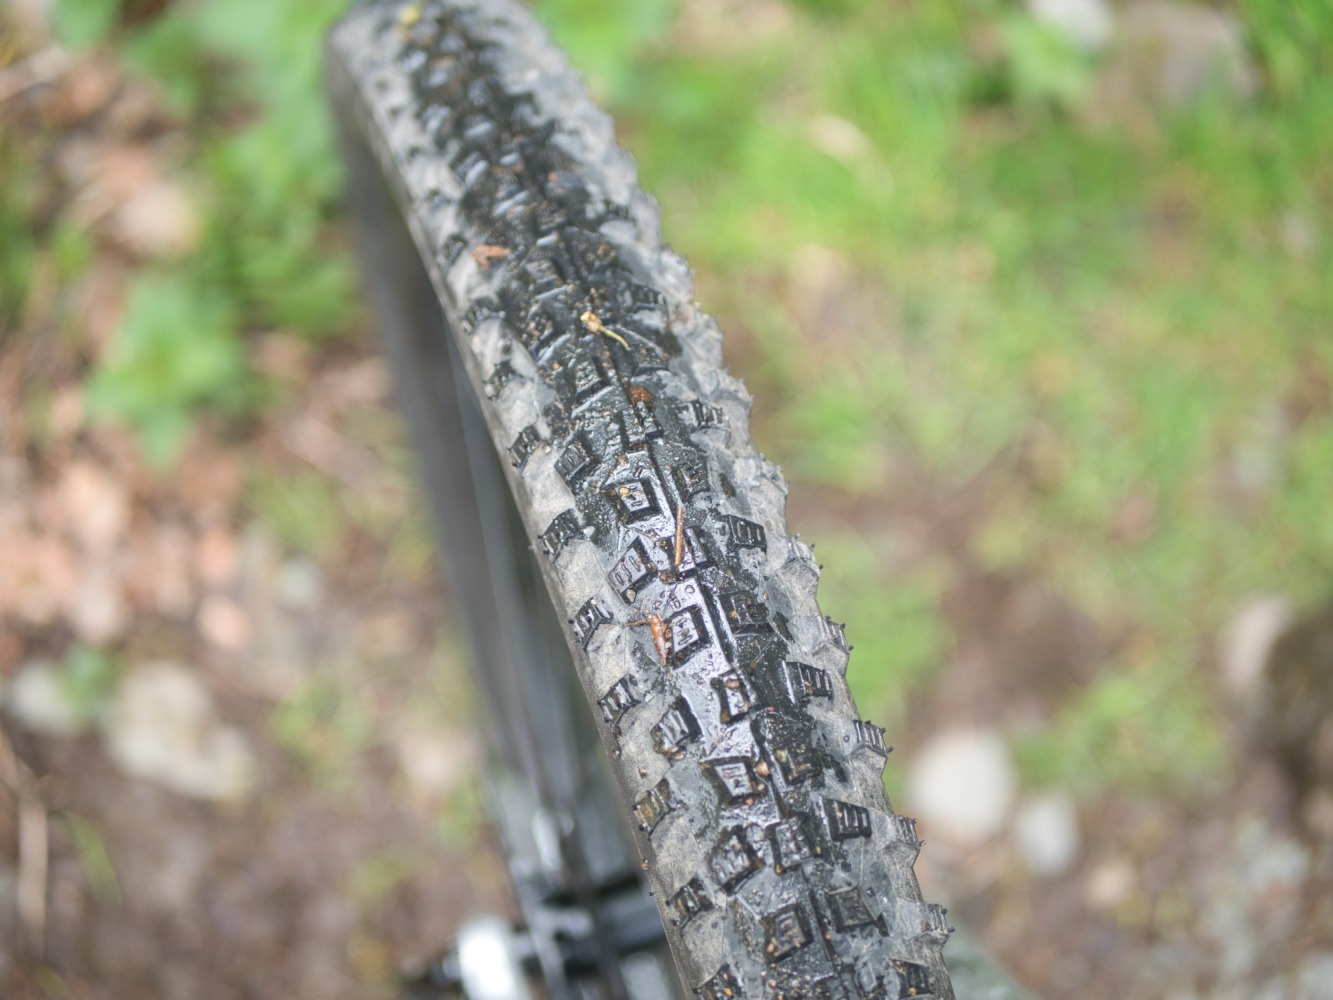 woom OFF AIR 5 review: close up of the Schwalbe Rocket Ron tyre tread